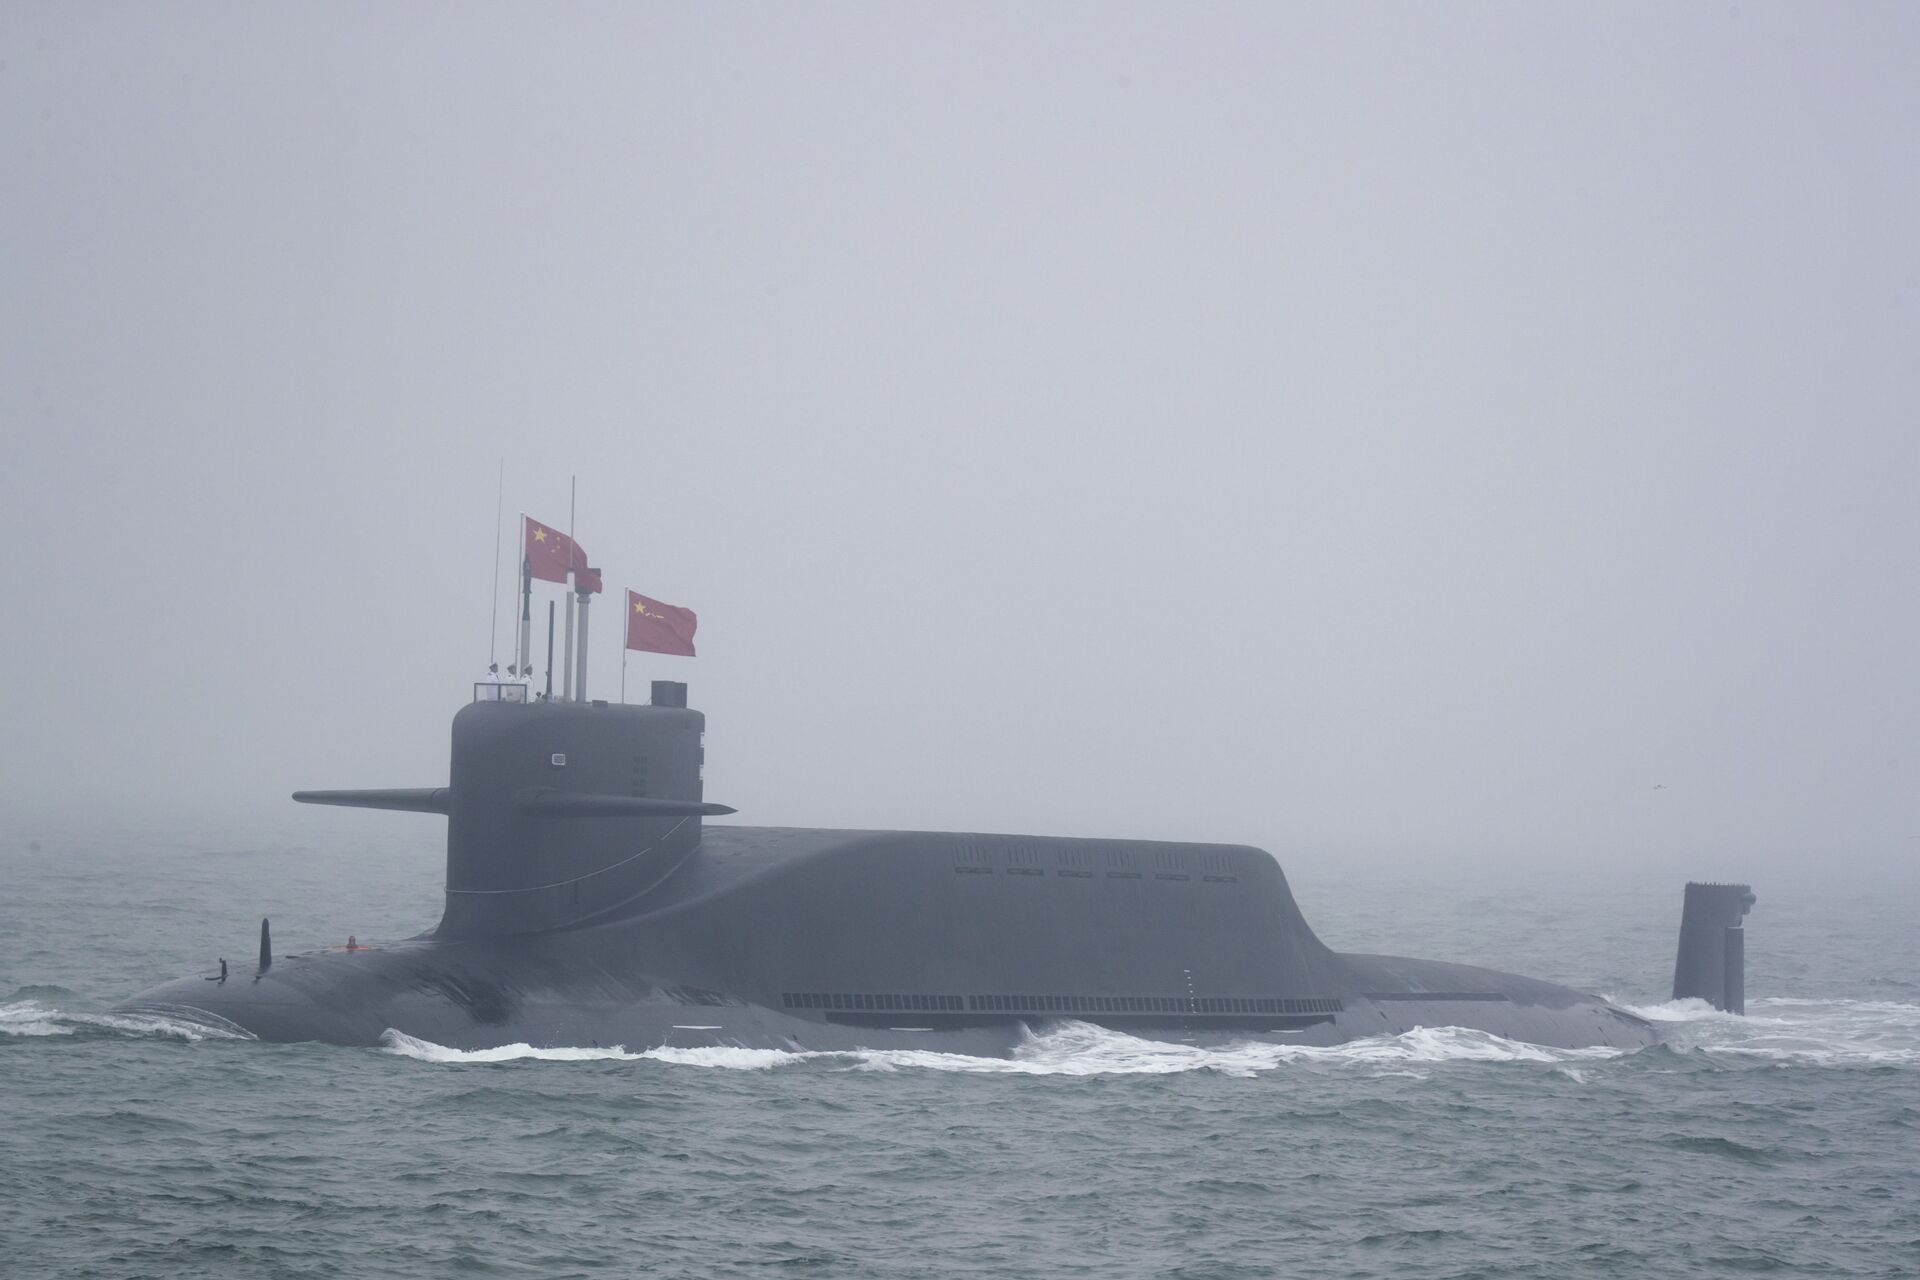 A new type 094A Jin-class nuclear submarine Long March 10 of the Chinese People's Liberation Army (PLA) Navy participates in a naval parade to commemorate the 70th anniversary of the founding of China's PLA Navy in the sea near Qingdao in eastern China's Shandong province, Tuesday, April 23, 2019 - Sputnik International, 1920, 08.10.2021